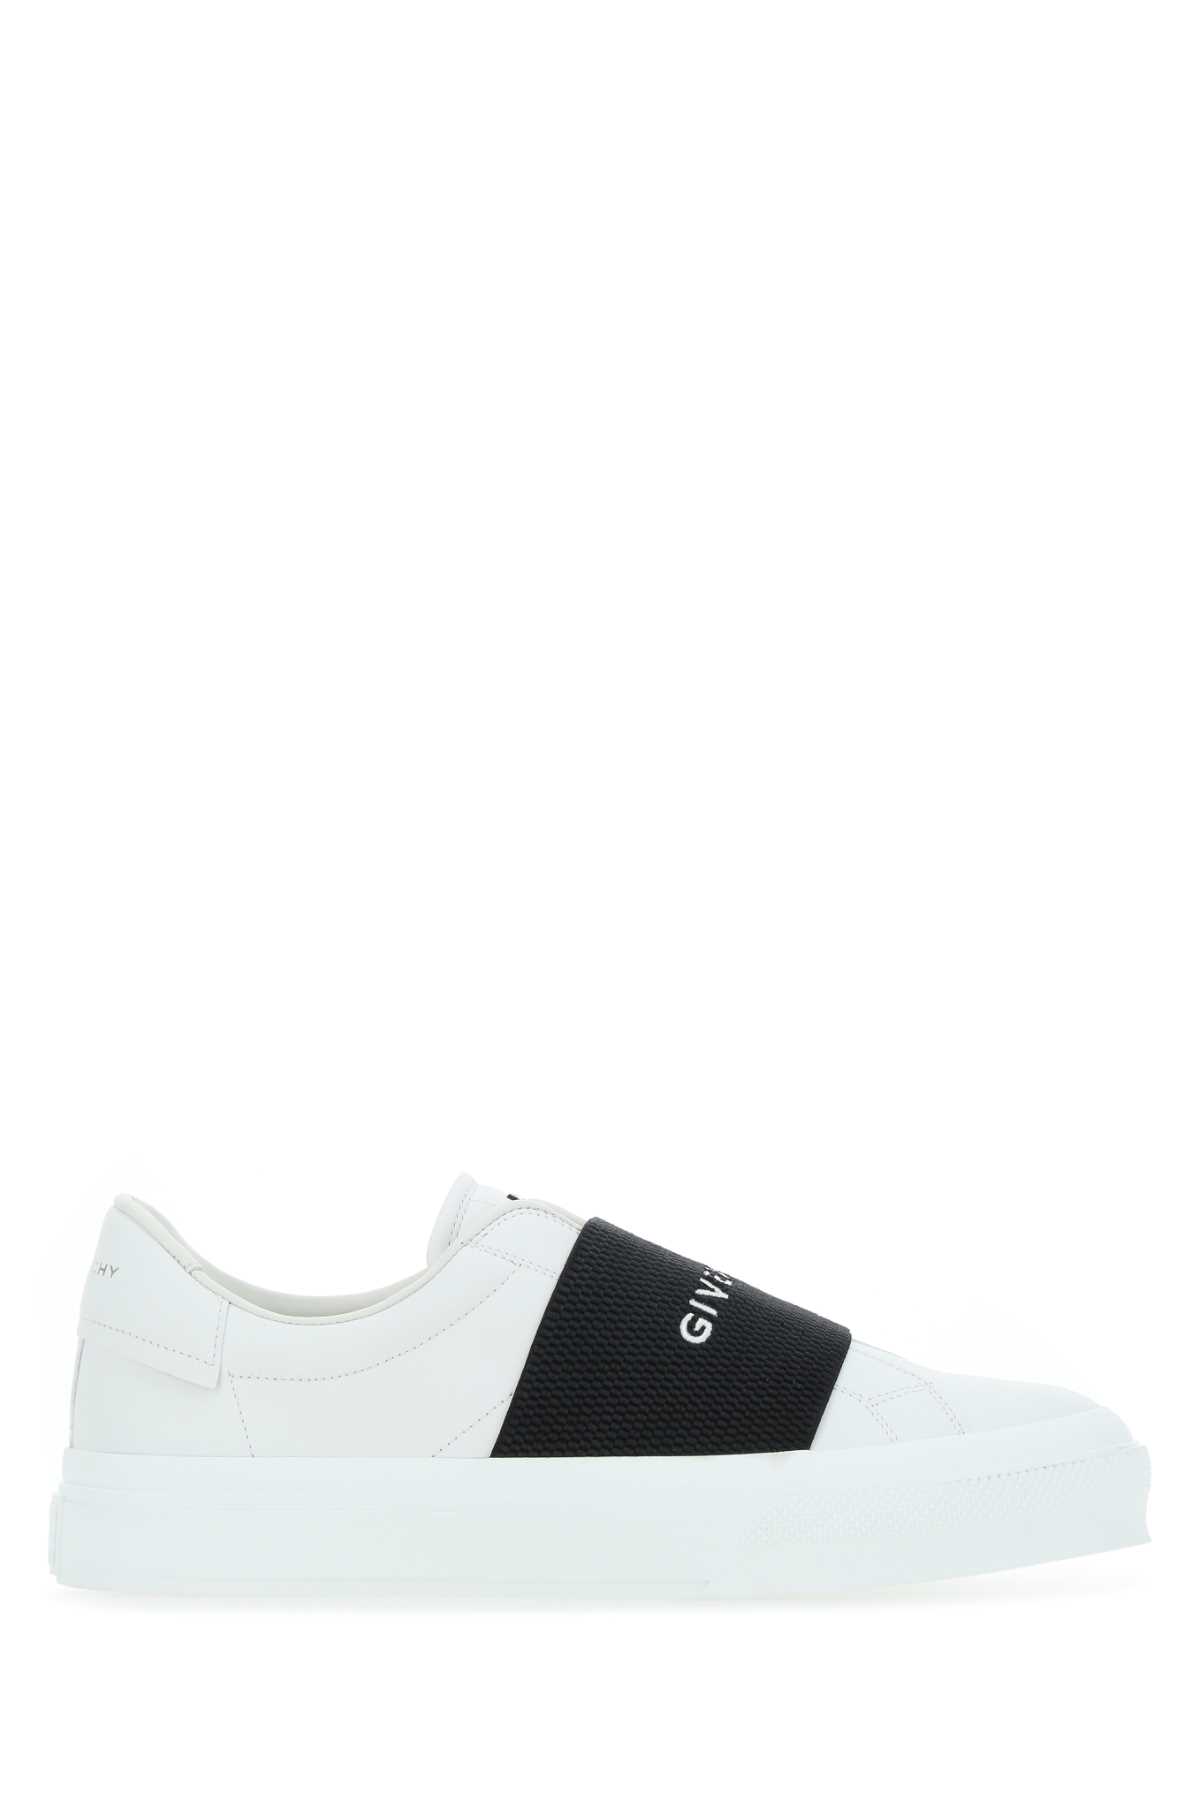 Shop Givenchy White Leather New City Slip Ons In Whiteblack